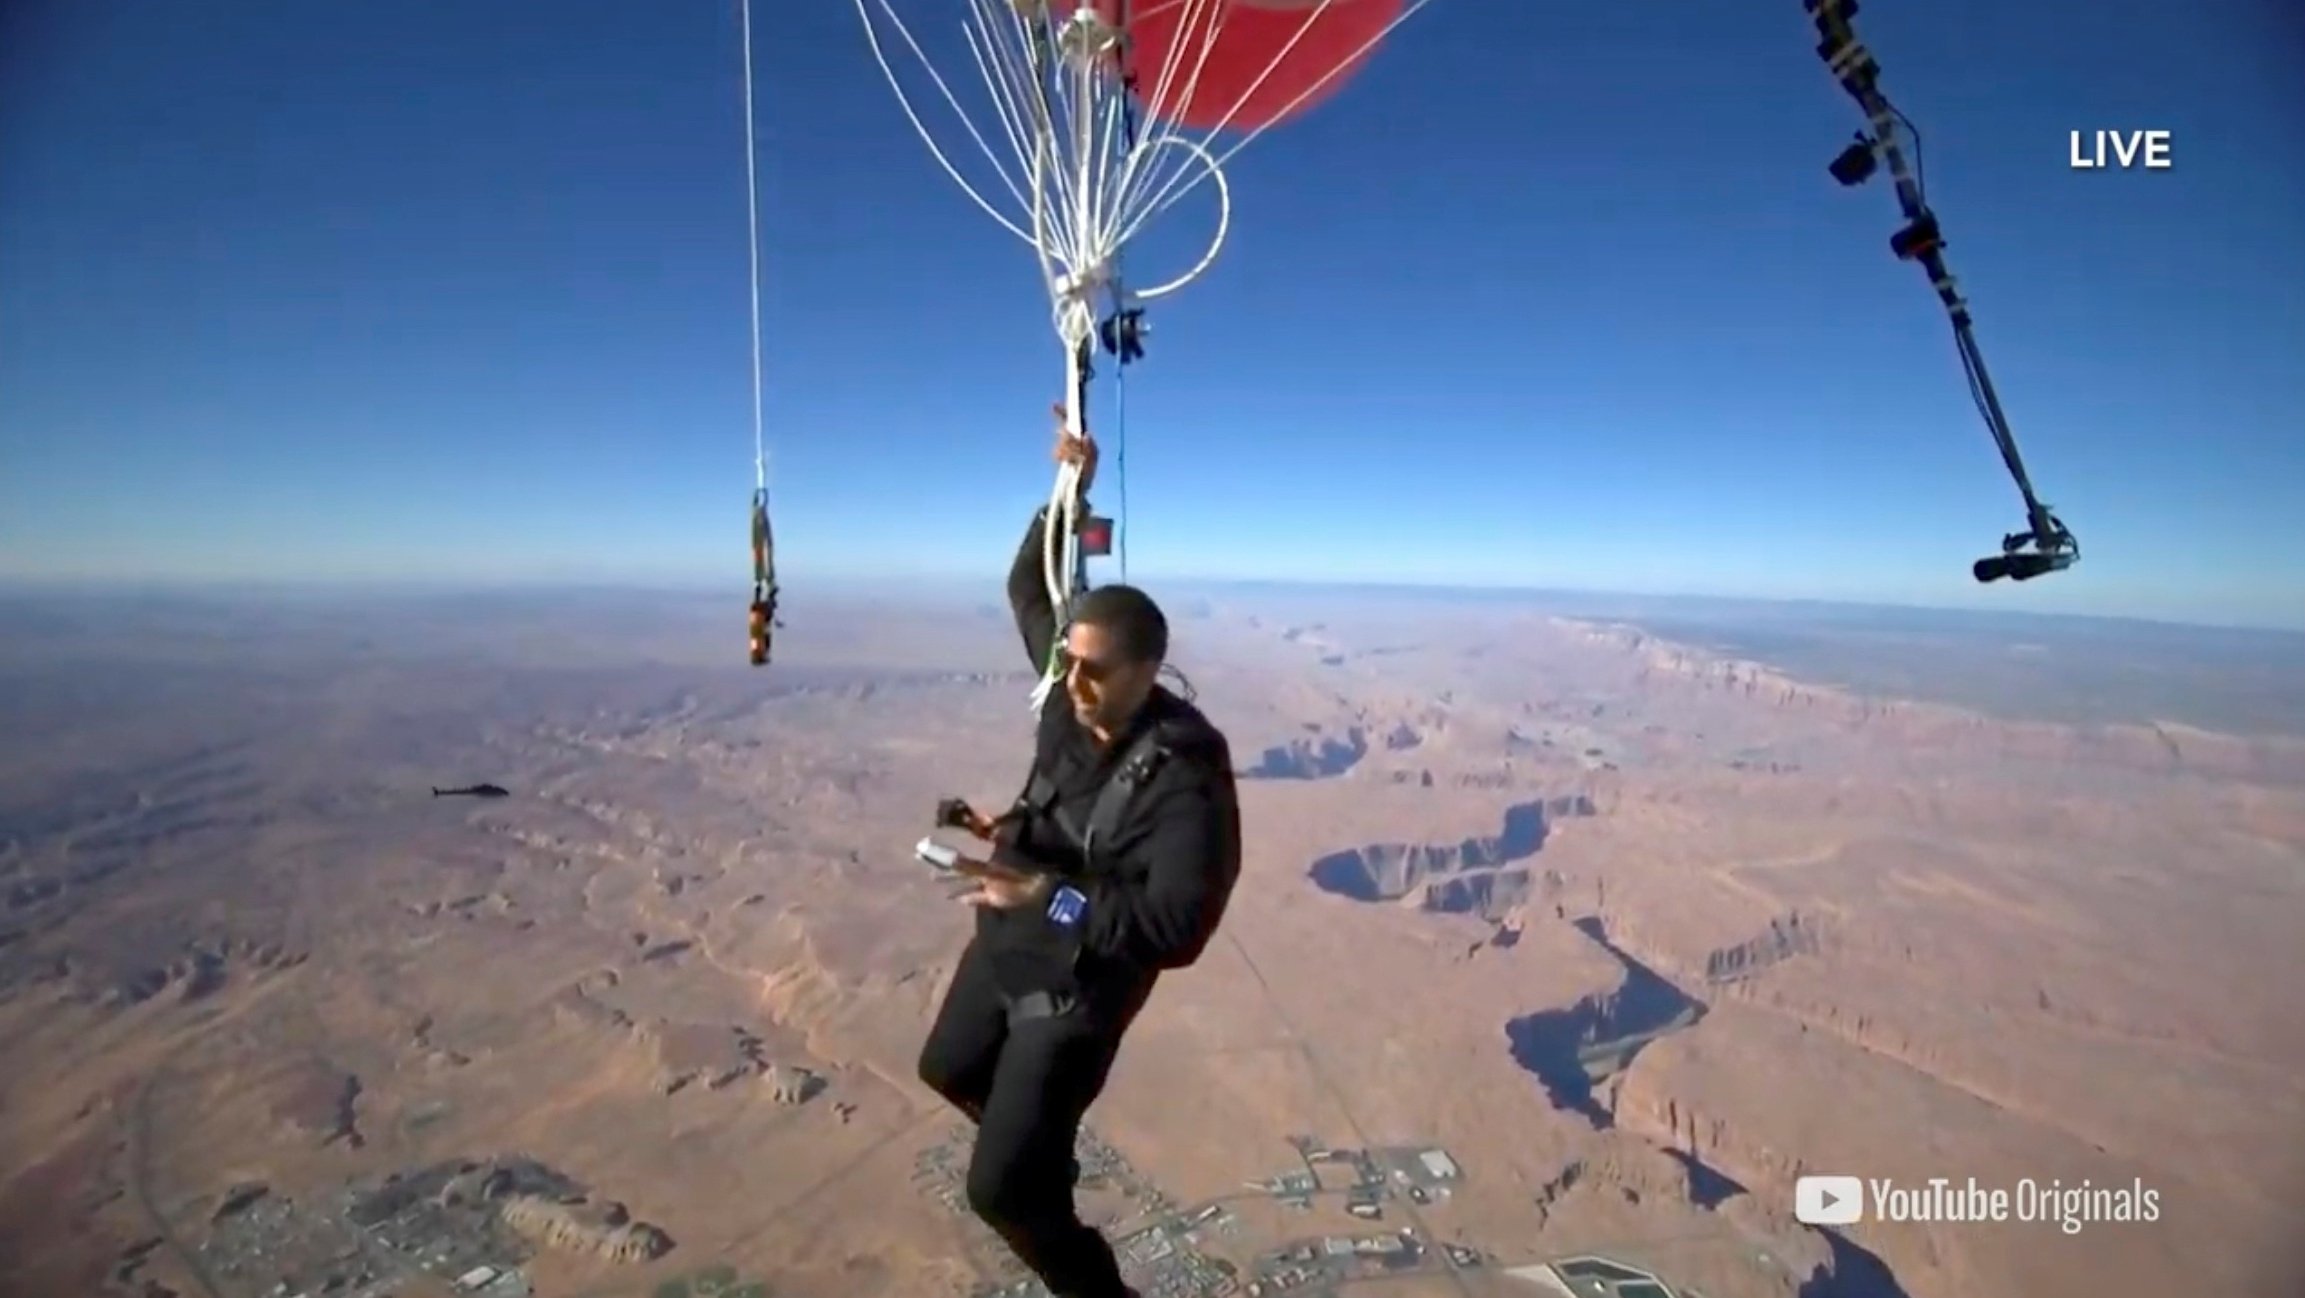 Extreme performer David Blaine hangs with a parachute under a cluster of balloons during a stunt to fly thousands of feet into the air, in a still image from video taken over Page, Arizona, U.S., Sept. 2, 2020.  (David Blaine handout via Reuters)